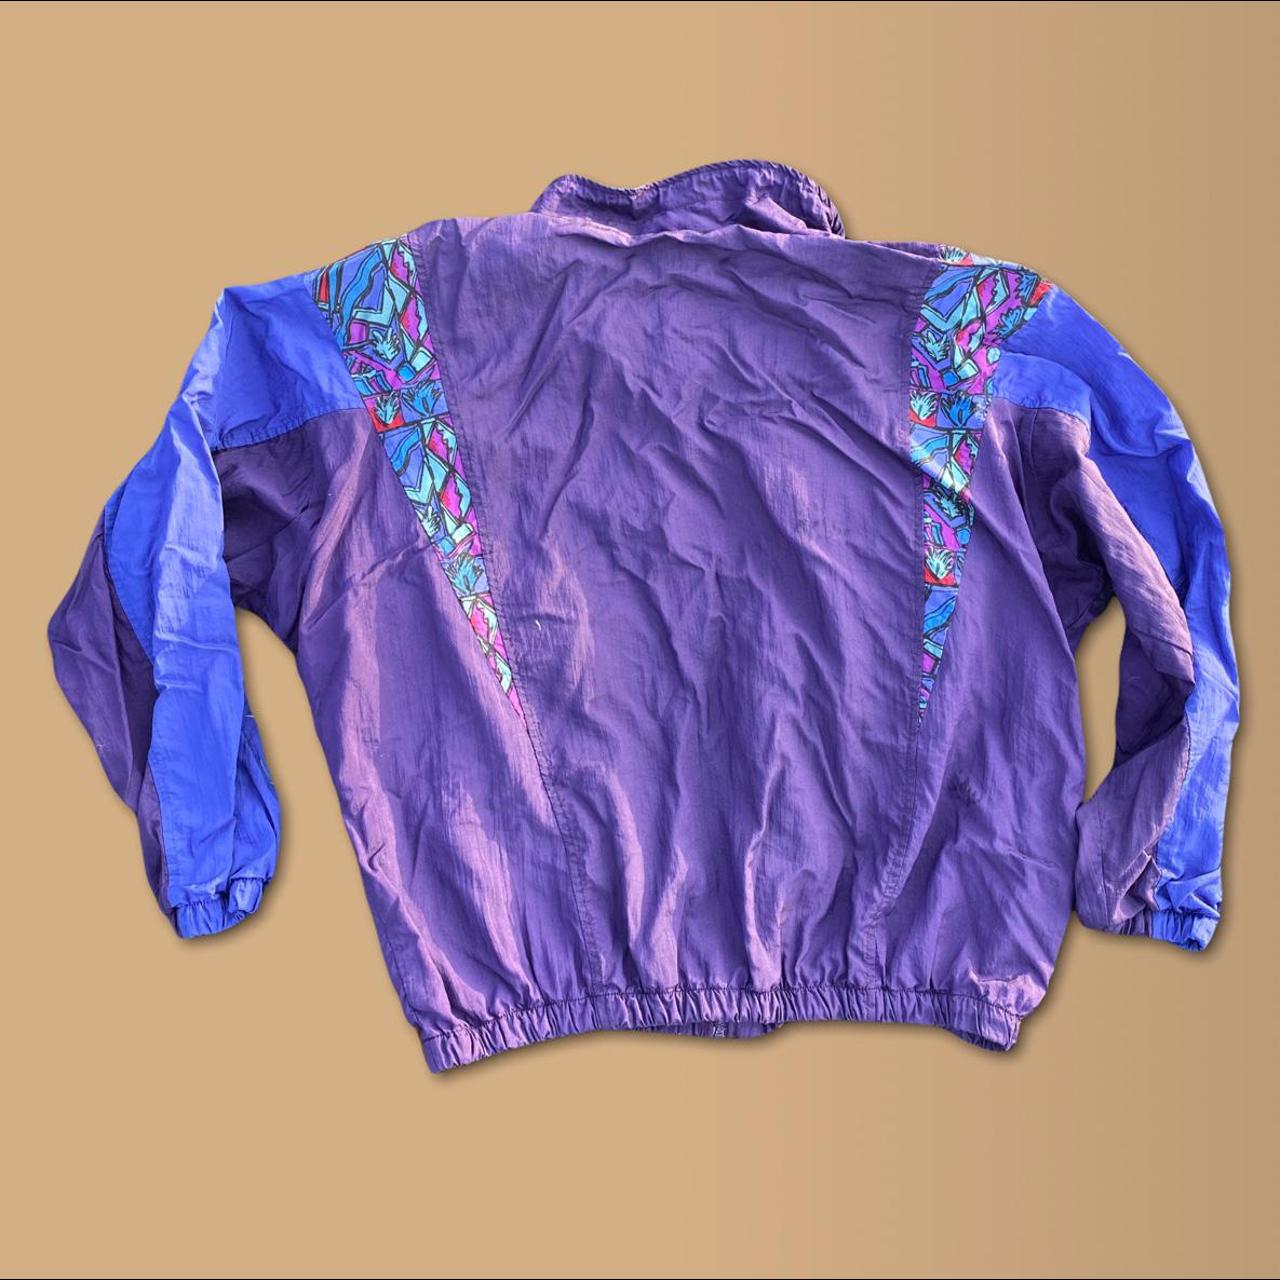 Product Image 2 - Vintage 90s purple and blue